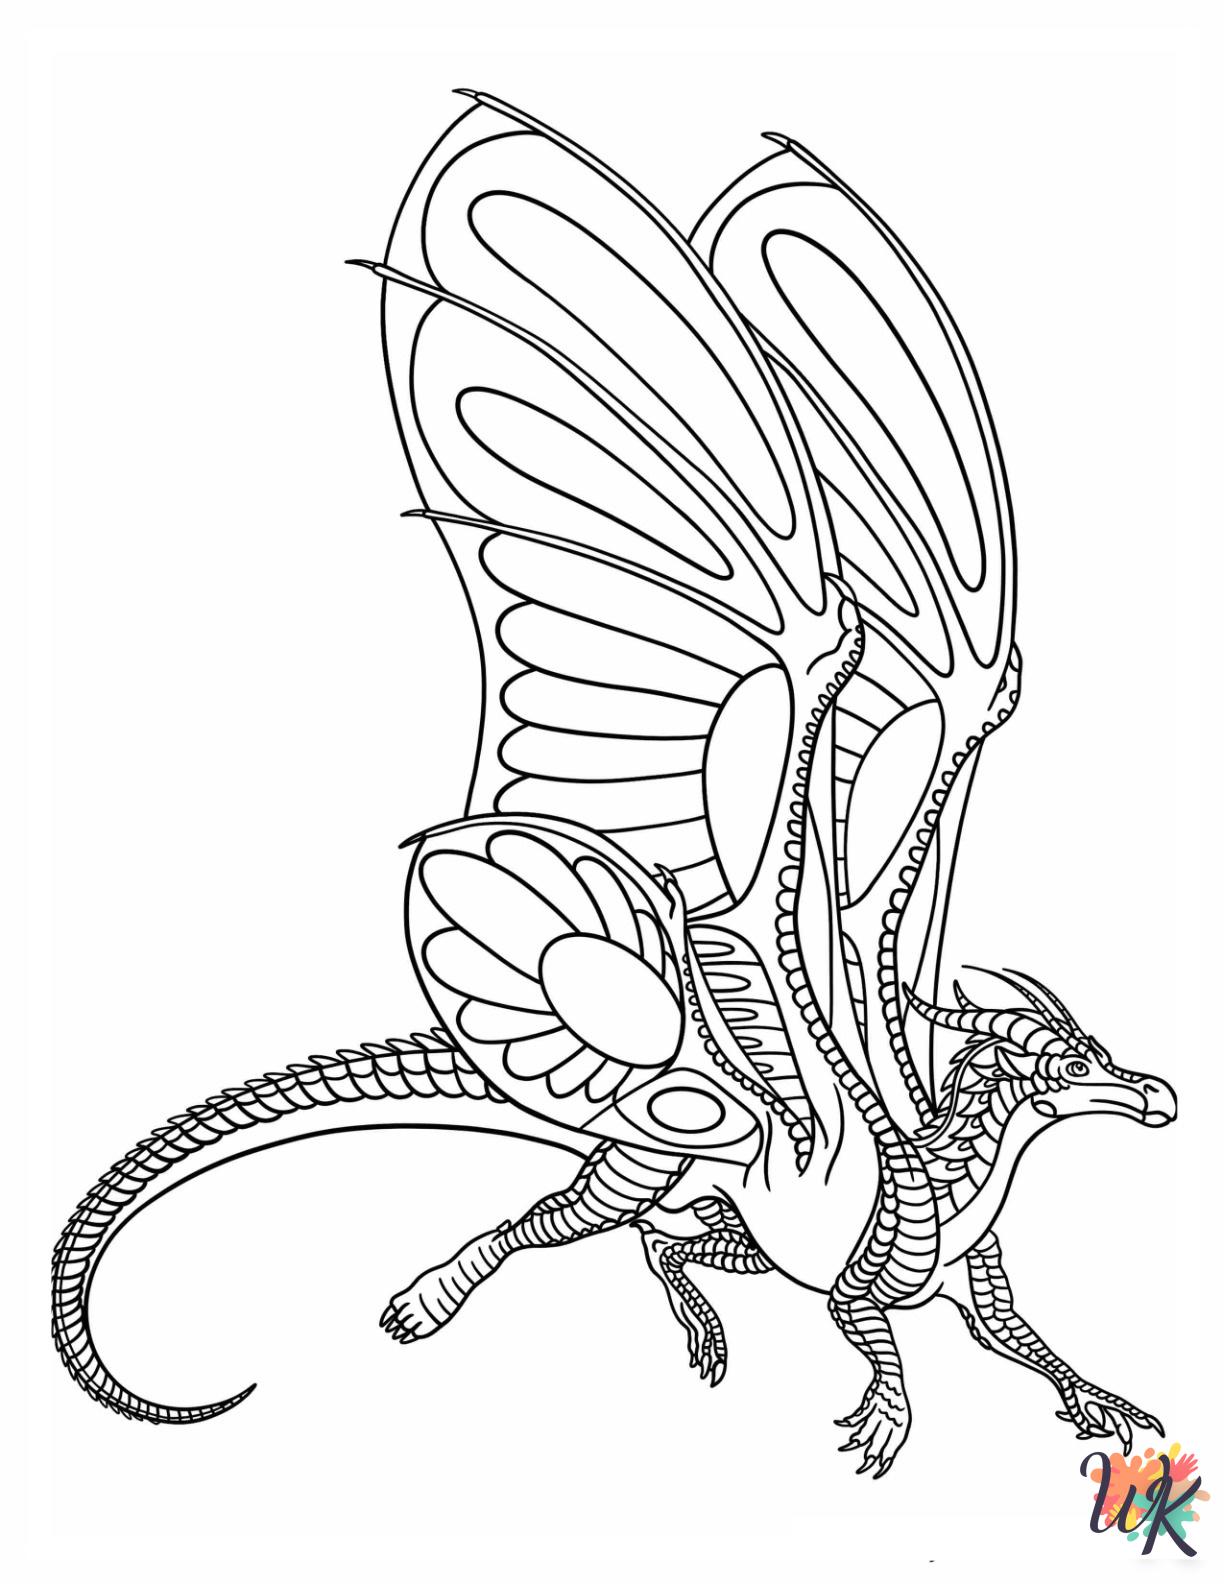 Wings Of Fire coloring pages for adults